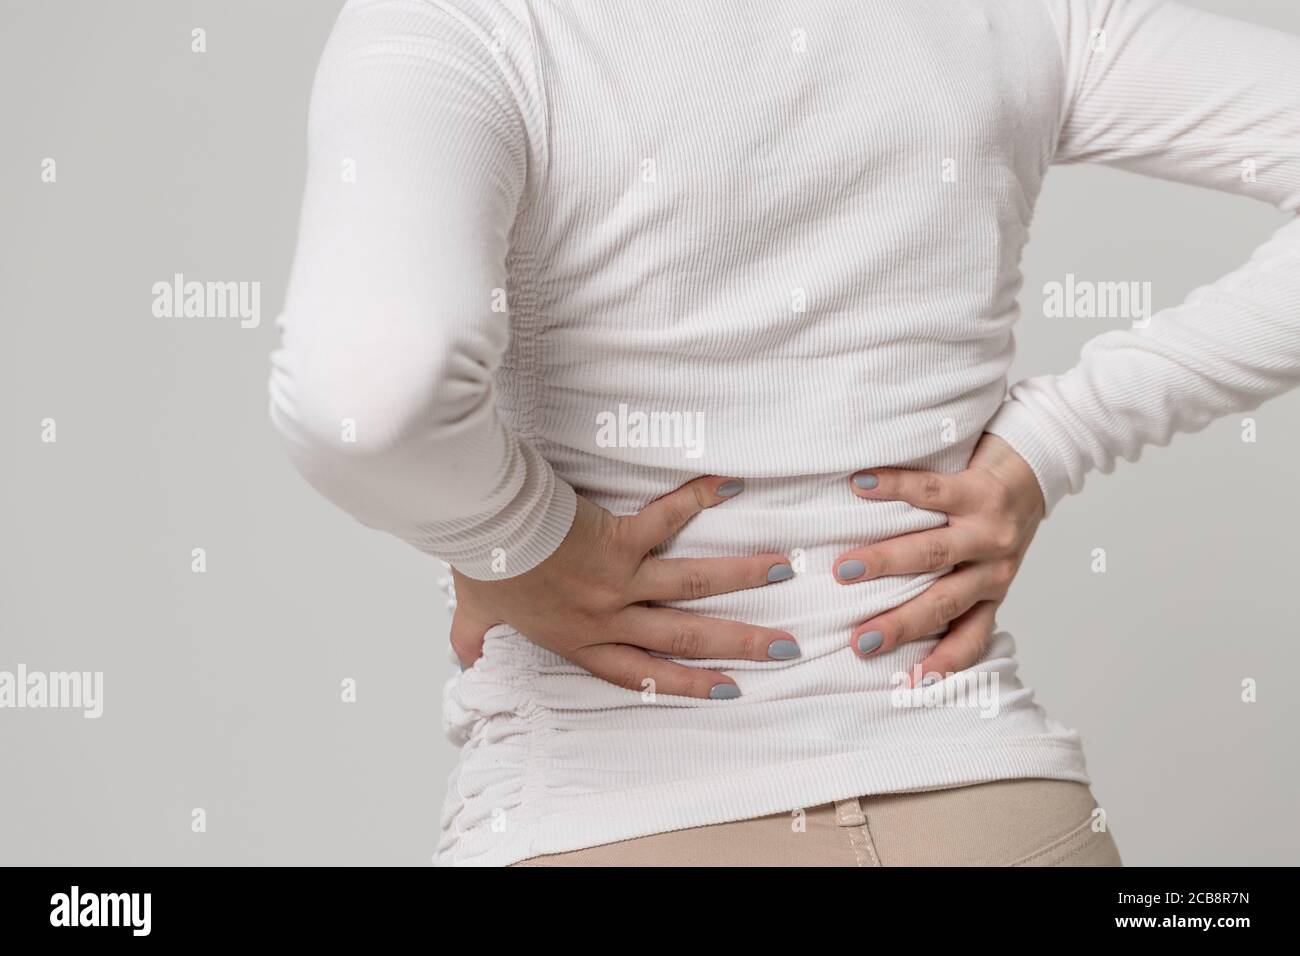 https://c8.alamy.com/comp/2CB8R7N/closeup-view-of-woman-having-pain-muscle-or-chronic-nerve-pain-in-her-back-after-work-isolated-diseases-of-spine-scoliosis-osteoporosis-2CB8R7N.jpg